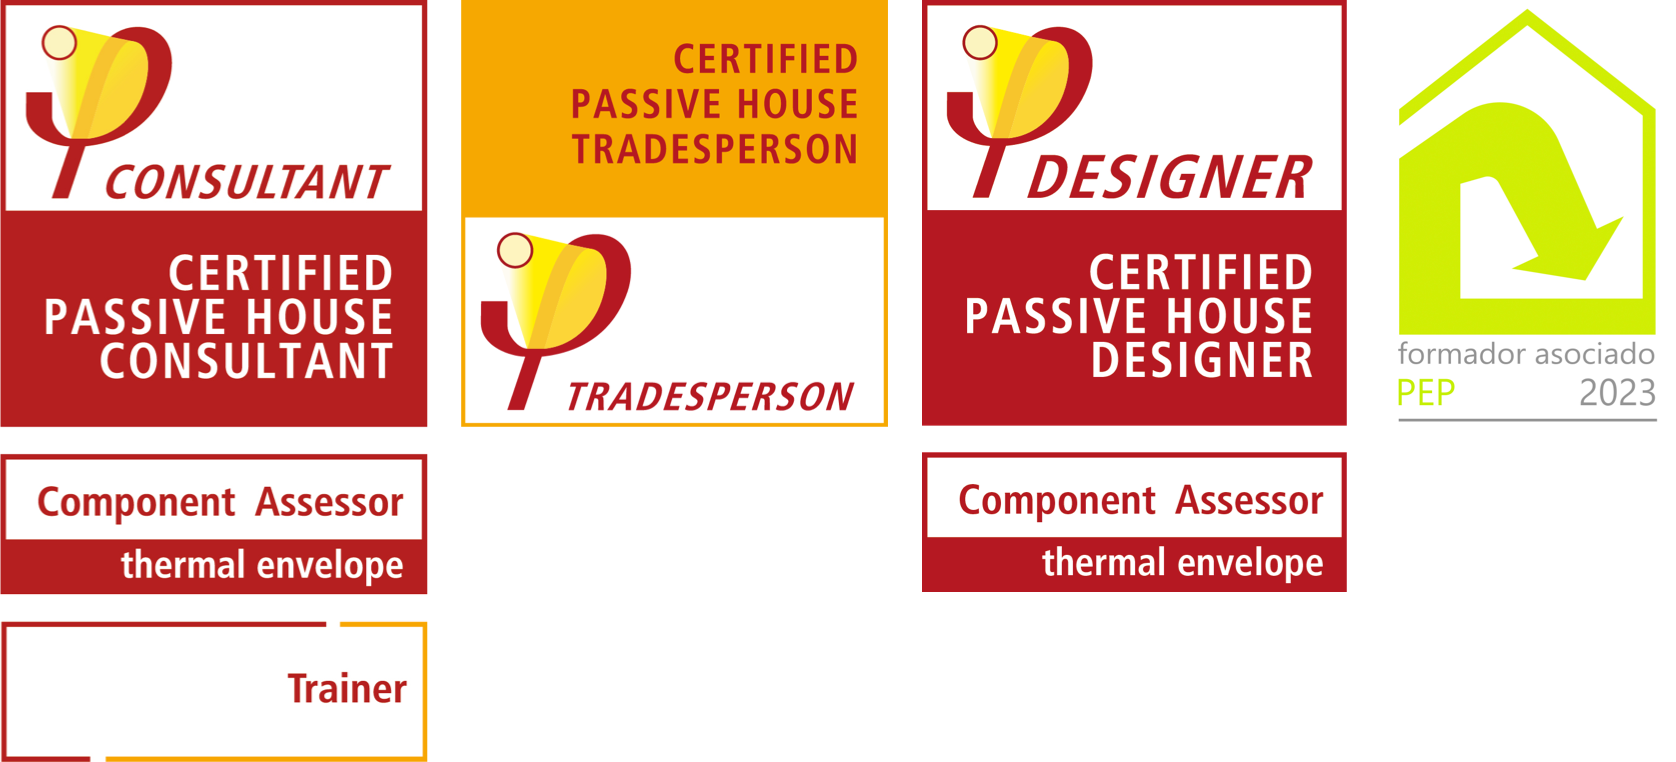 Praxis Consultant Cerfified Passive House Consultant. Certified Passive house Tradesperson. Designer Certified Passive house Designer. Platoforma PEP